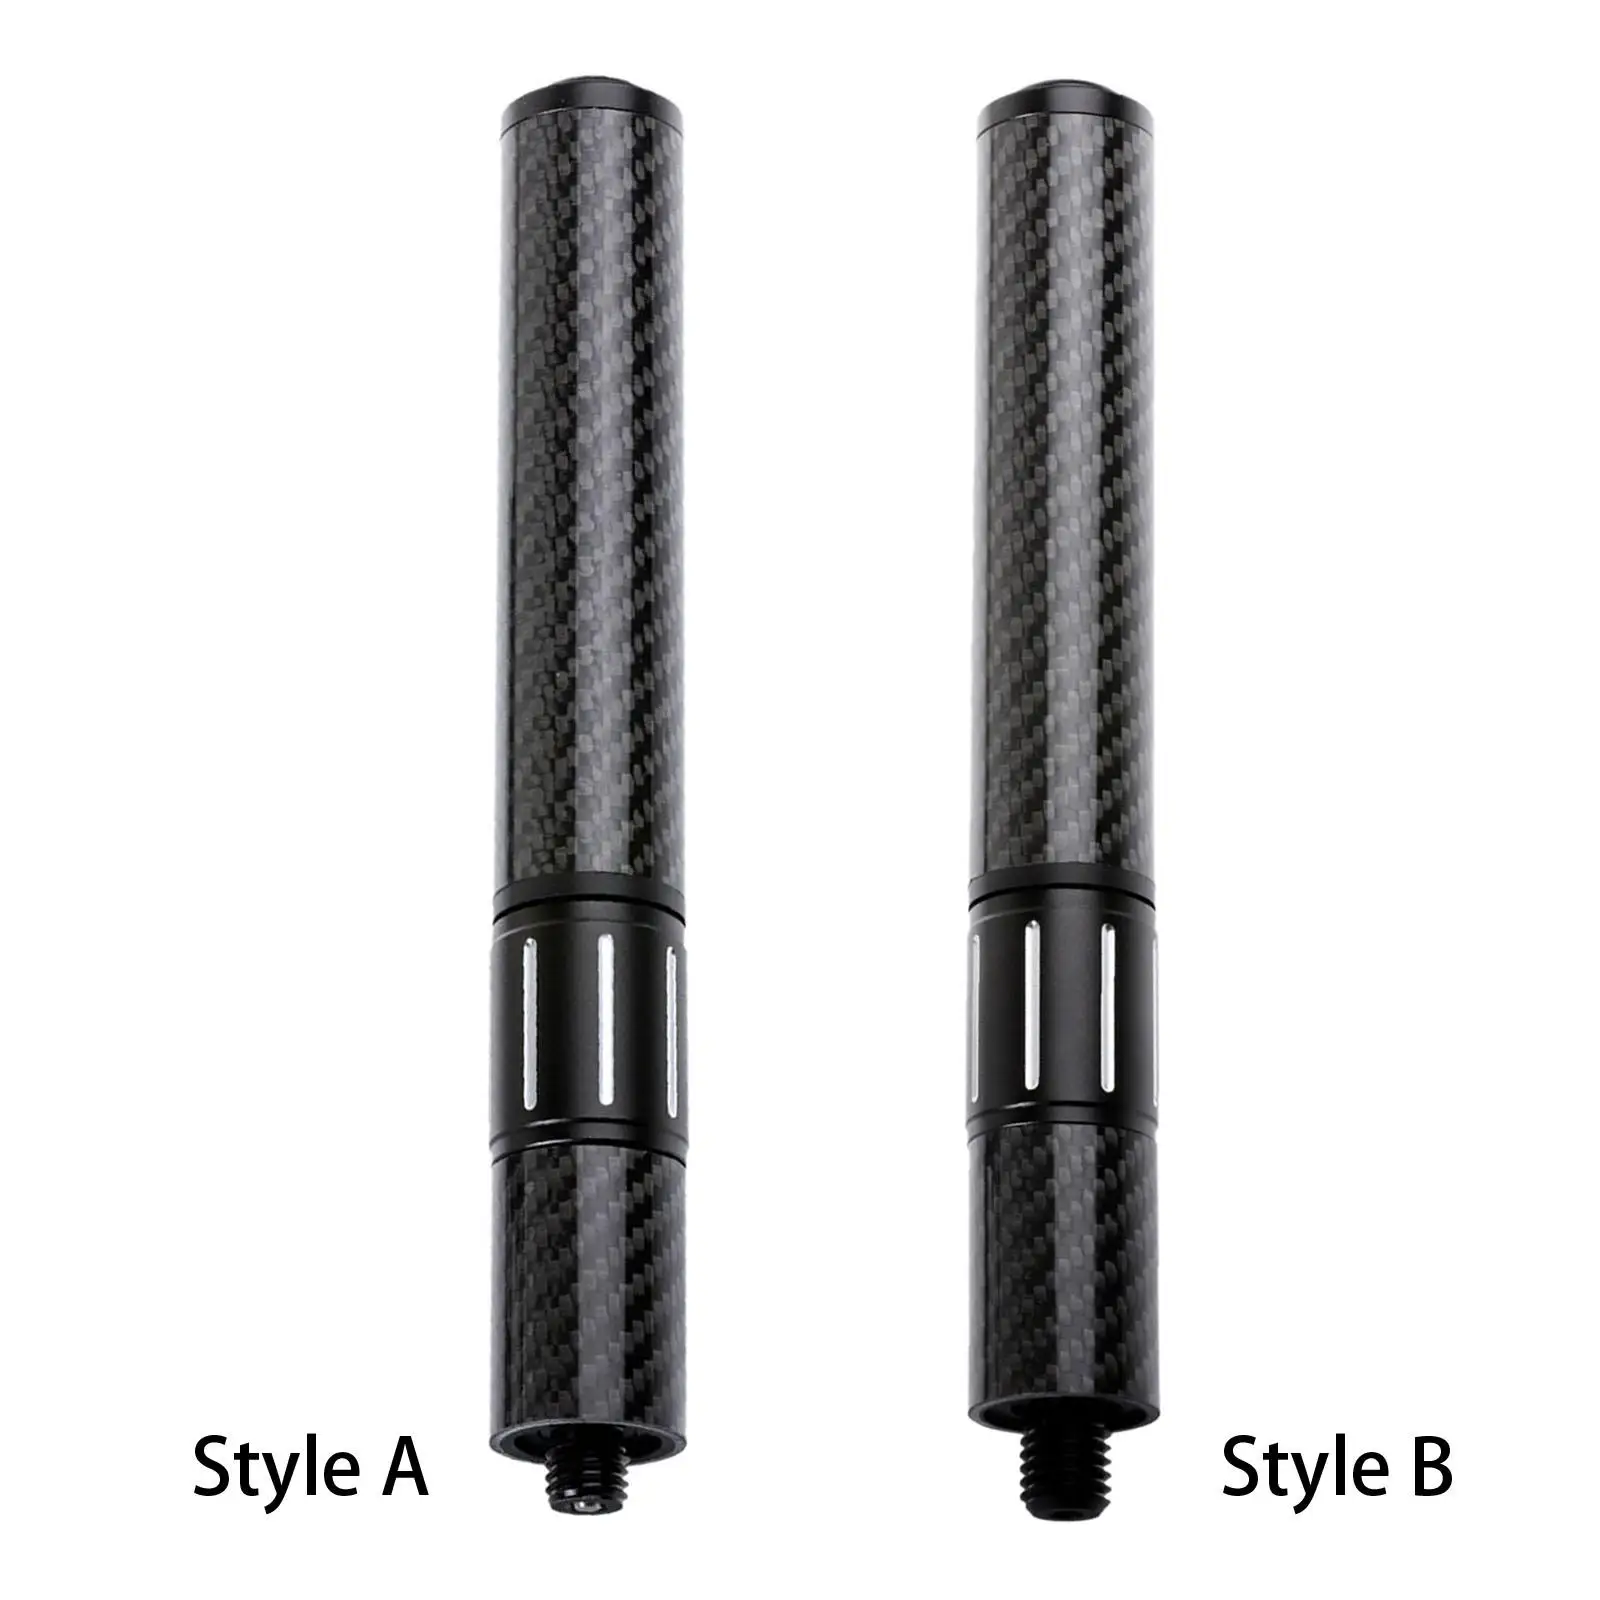 

Pool Stick Extension Pool Cue Extender Billiard Connect Shaft Portable Billiards Pool Cue Extension for Billiard Cues Athlete